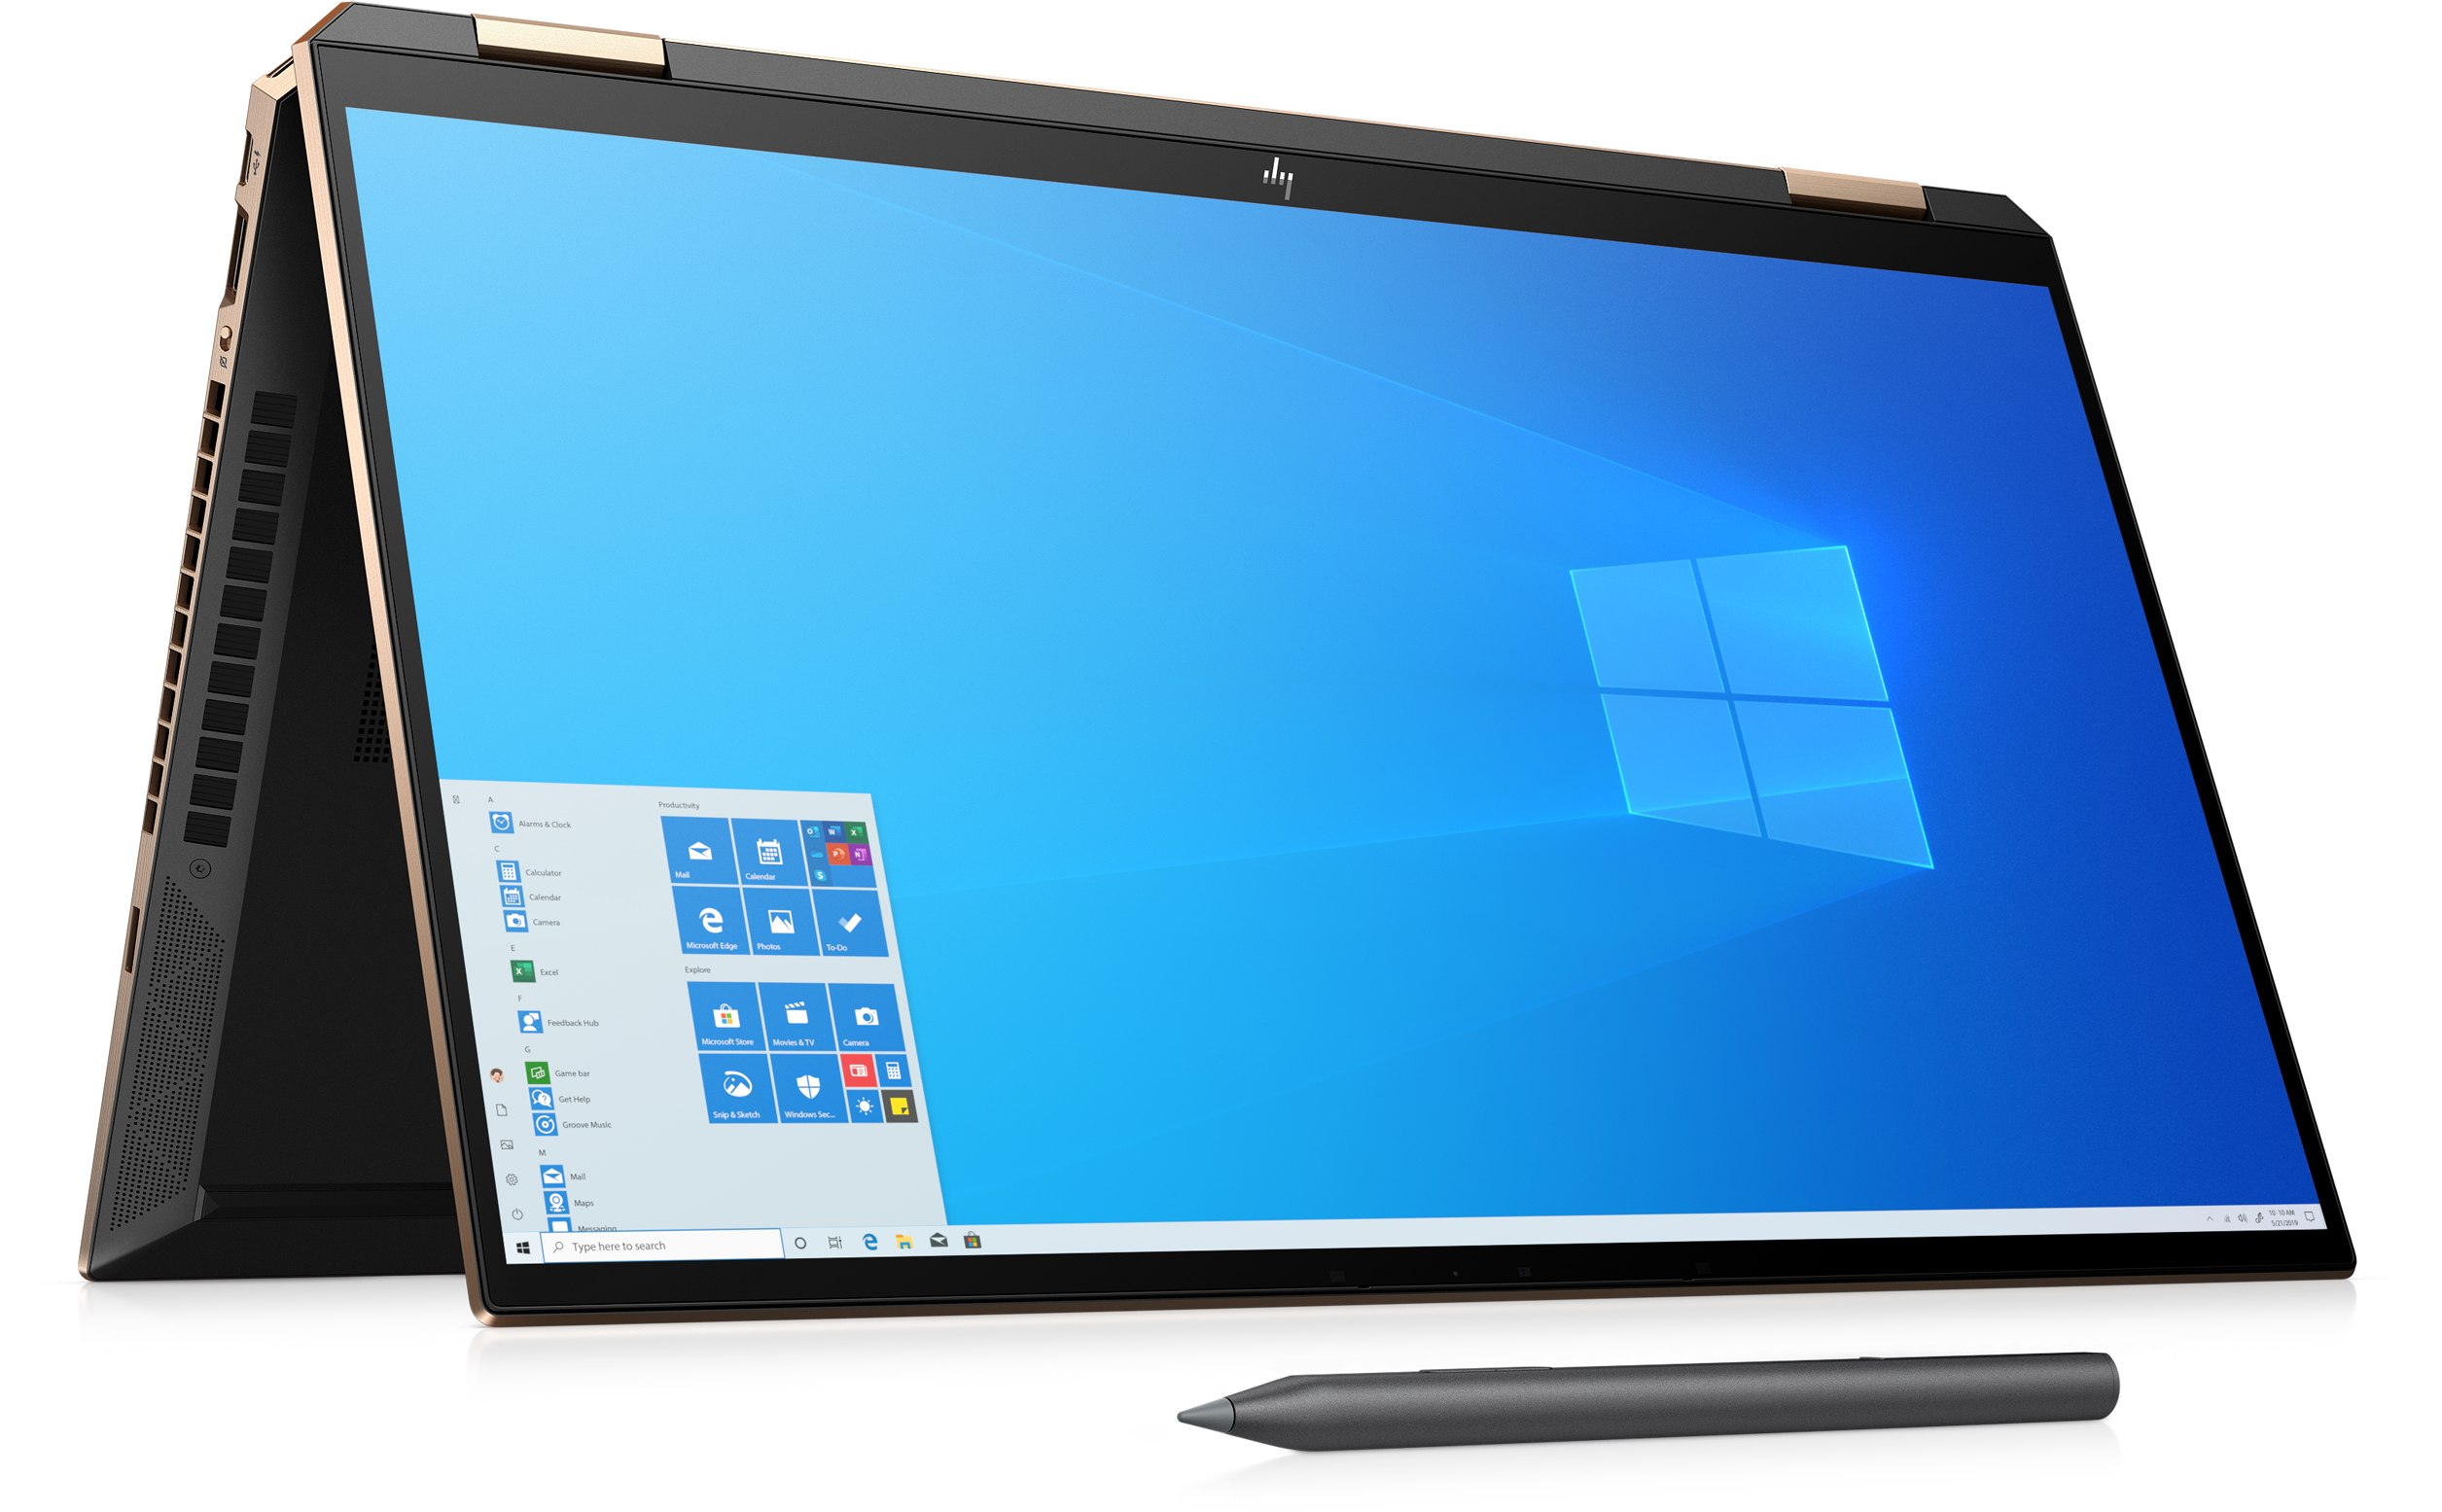 HP Spectre x360 Convertible 15-EB1071ms 2-in-1 PC